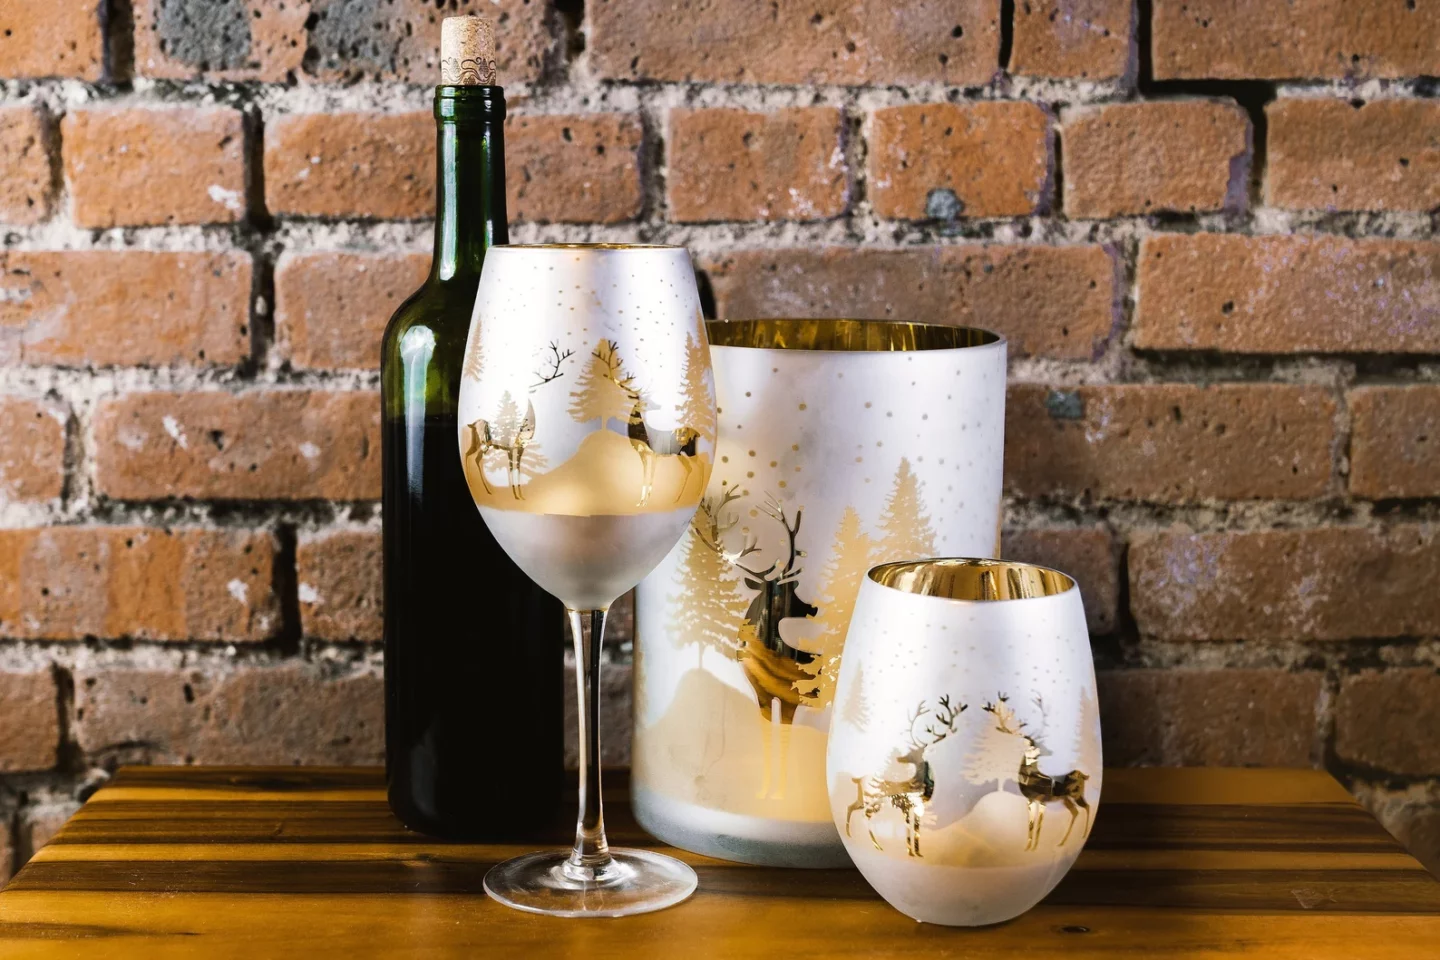 Gold and metallic wine glasses with silhouettes of reindeer and evergreens